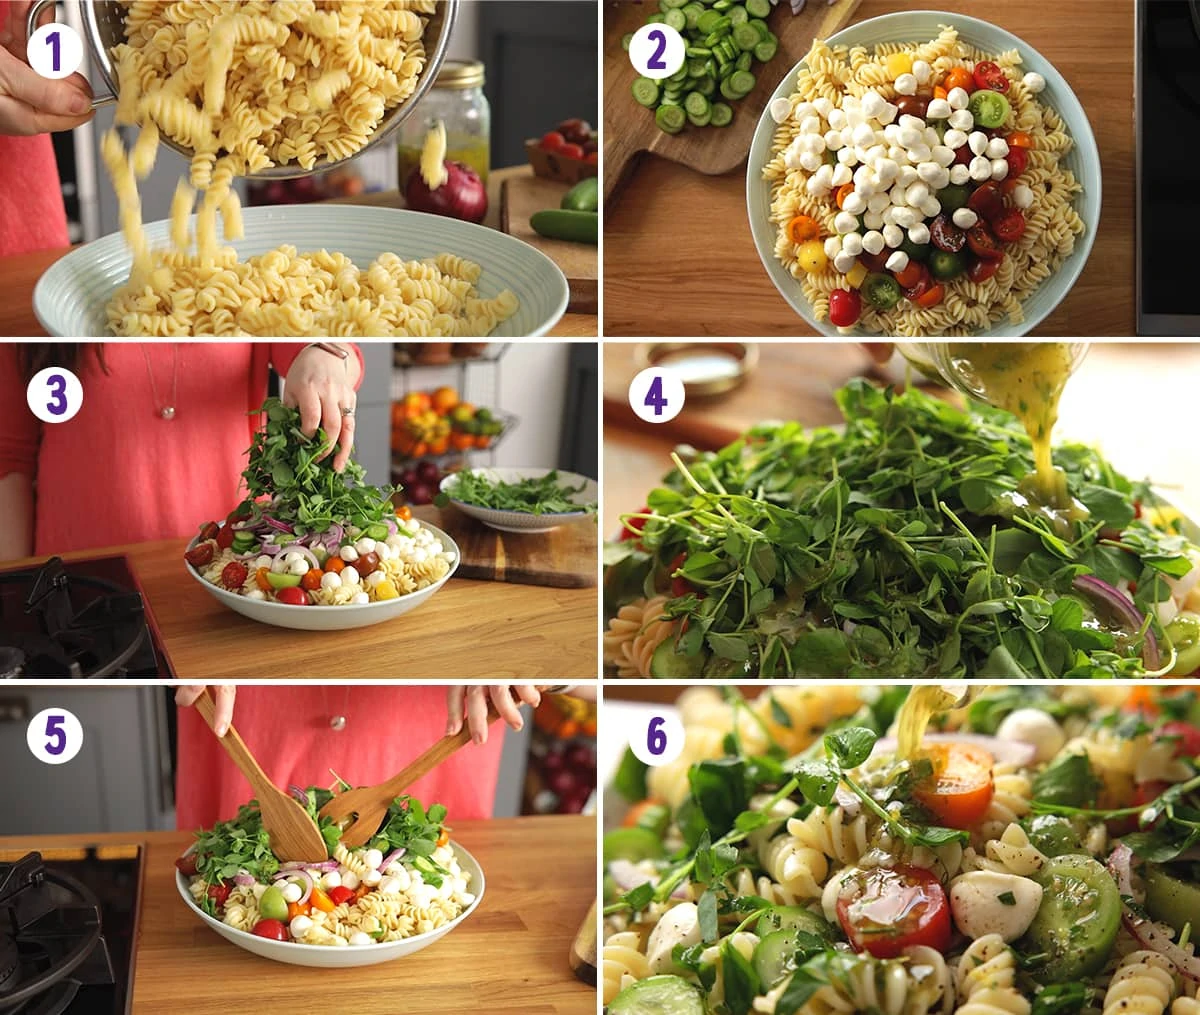 6 image collage showing how to make bowl of pasta salad